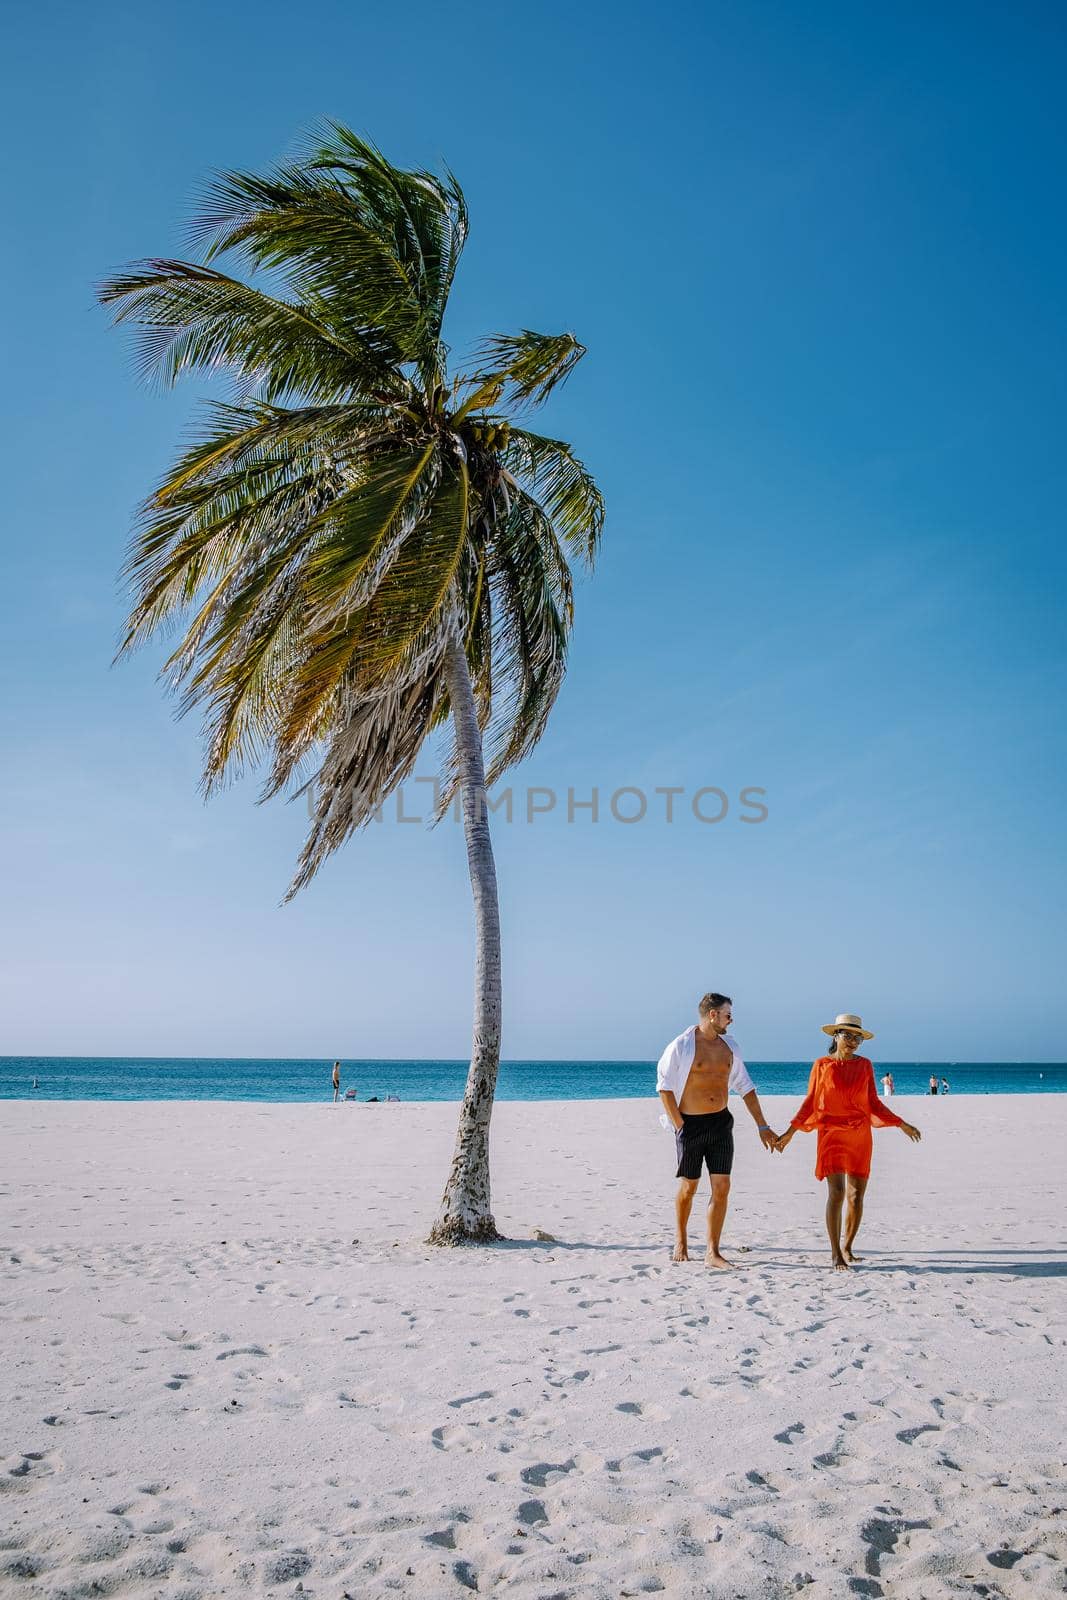 Palm Trees on the shoreline of Eagle Beach in Aruba by fokkebok